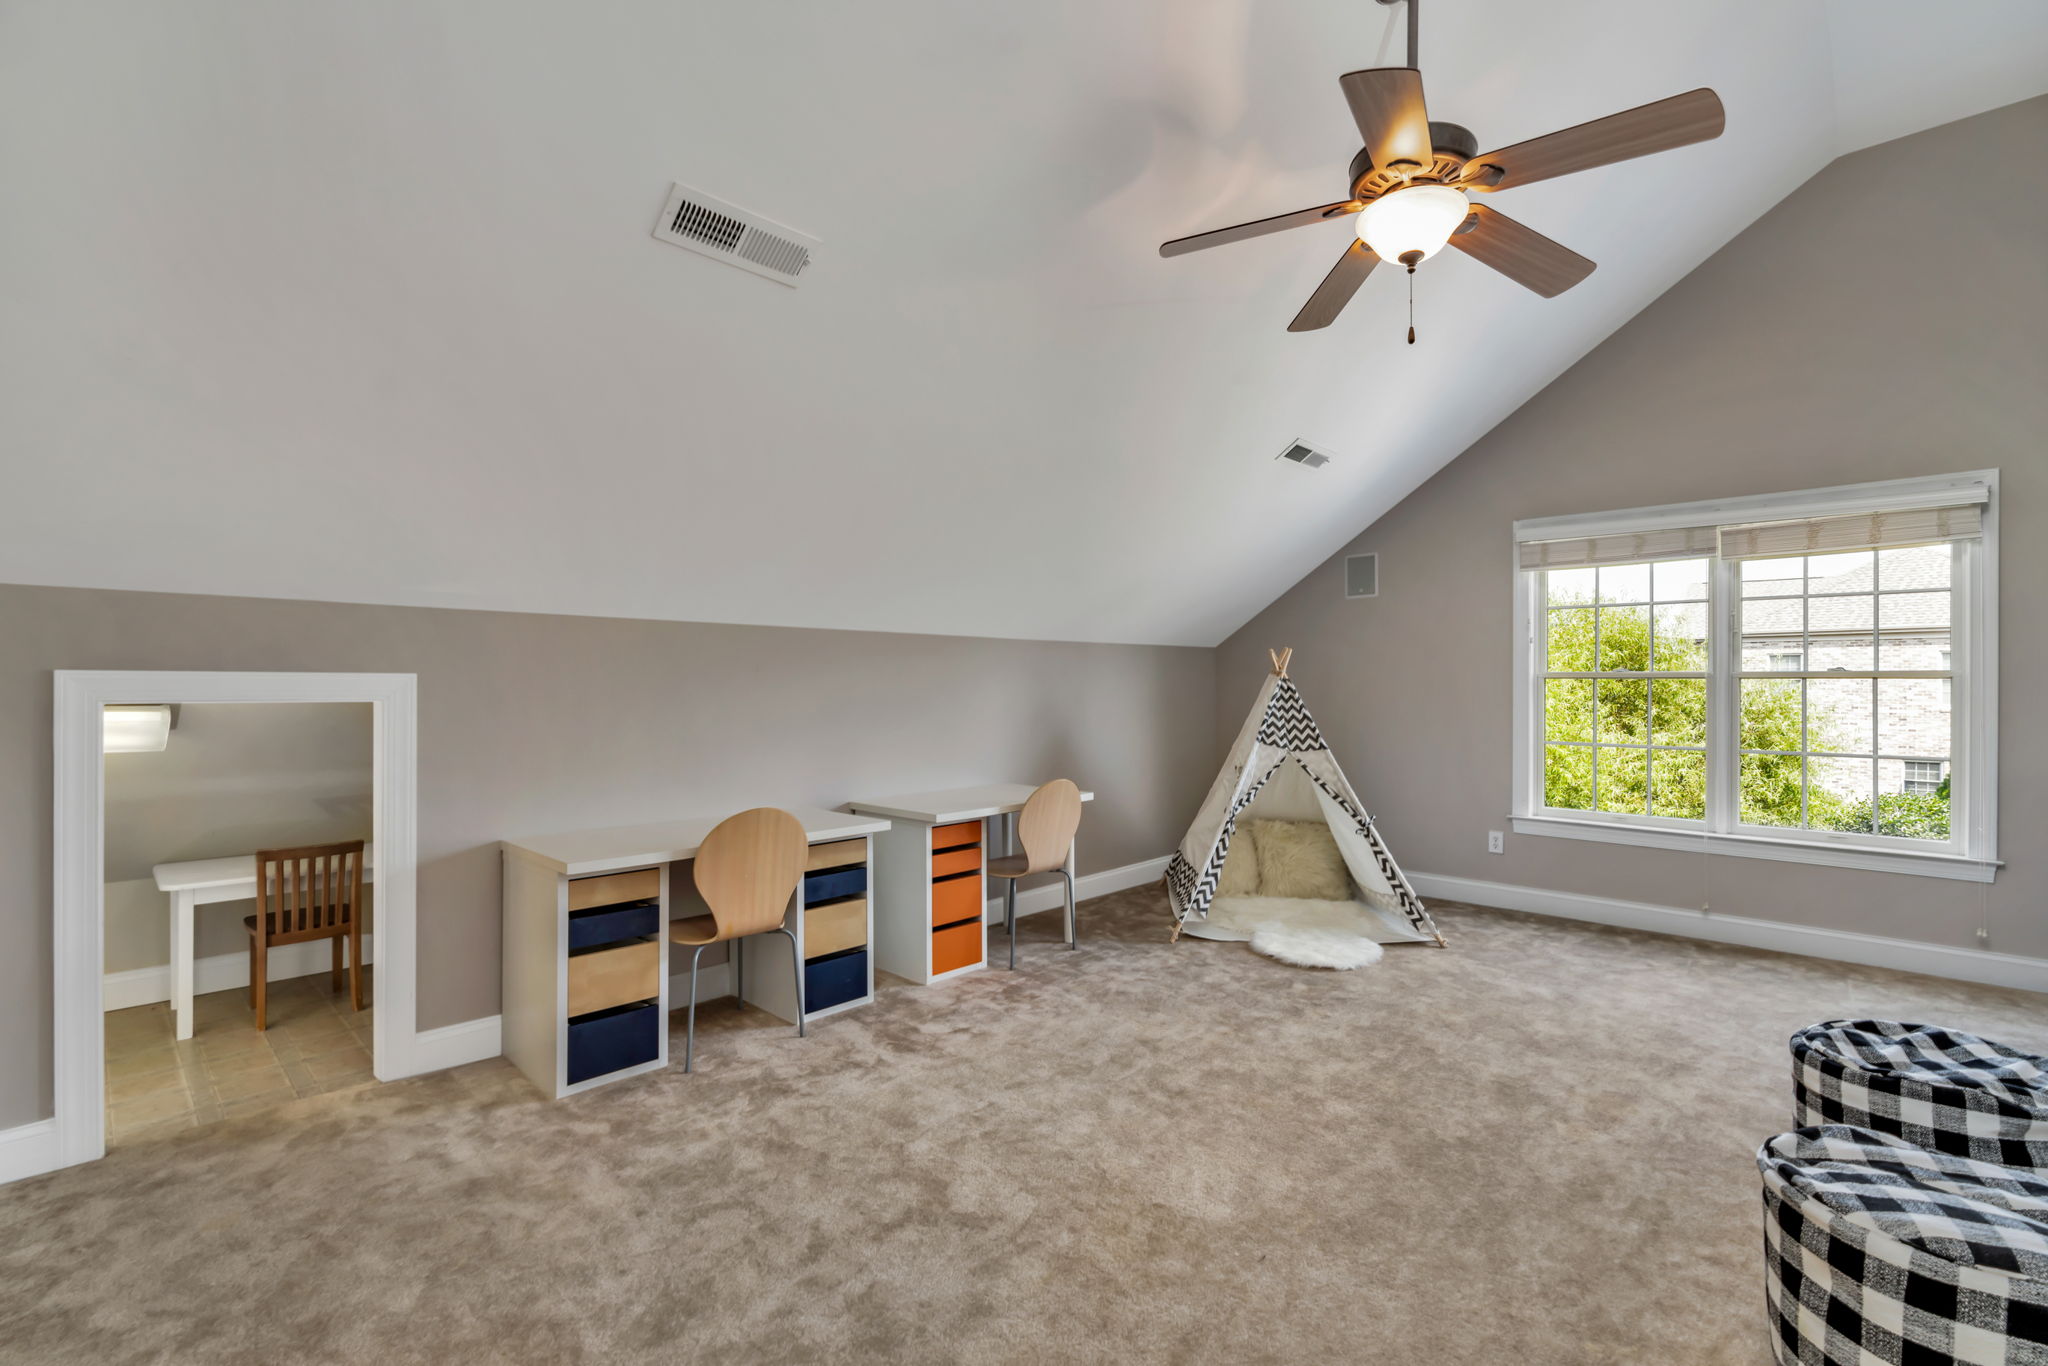 Generous bonus room has endless possibilities (entertainment, game room, playroom, etc.) Has built-in wall desk as well as under eave finished space.